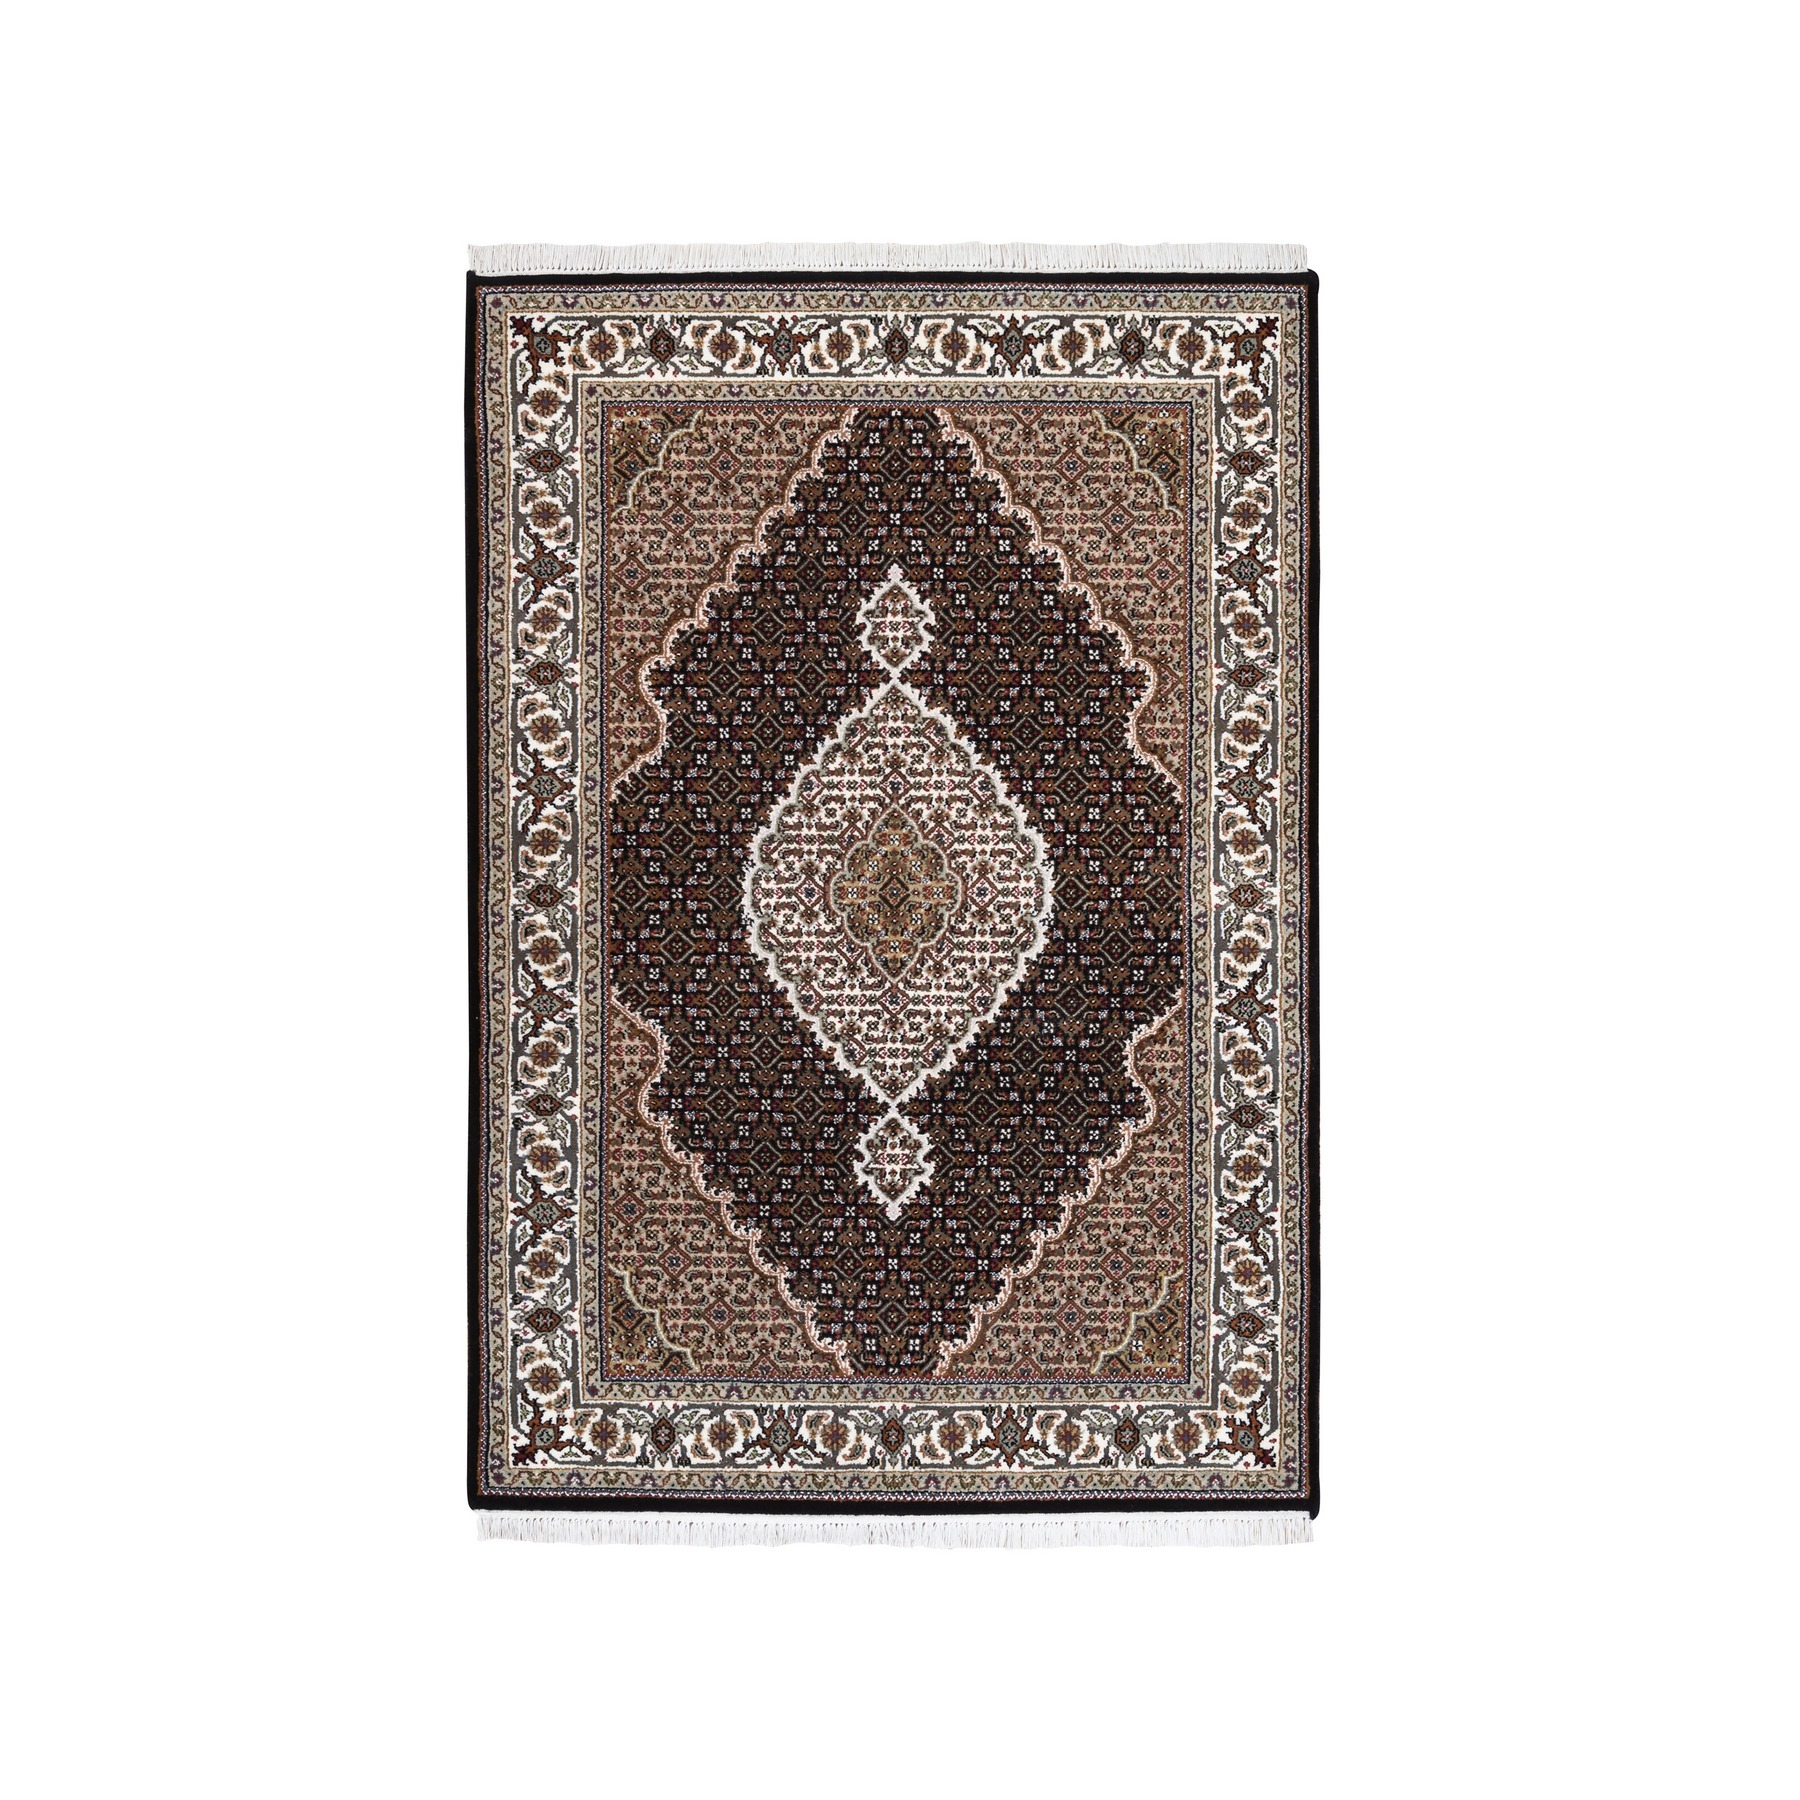 Pirniakan Collection Hand Knotted Black Rug No: 1125136